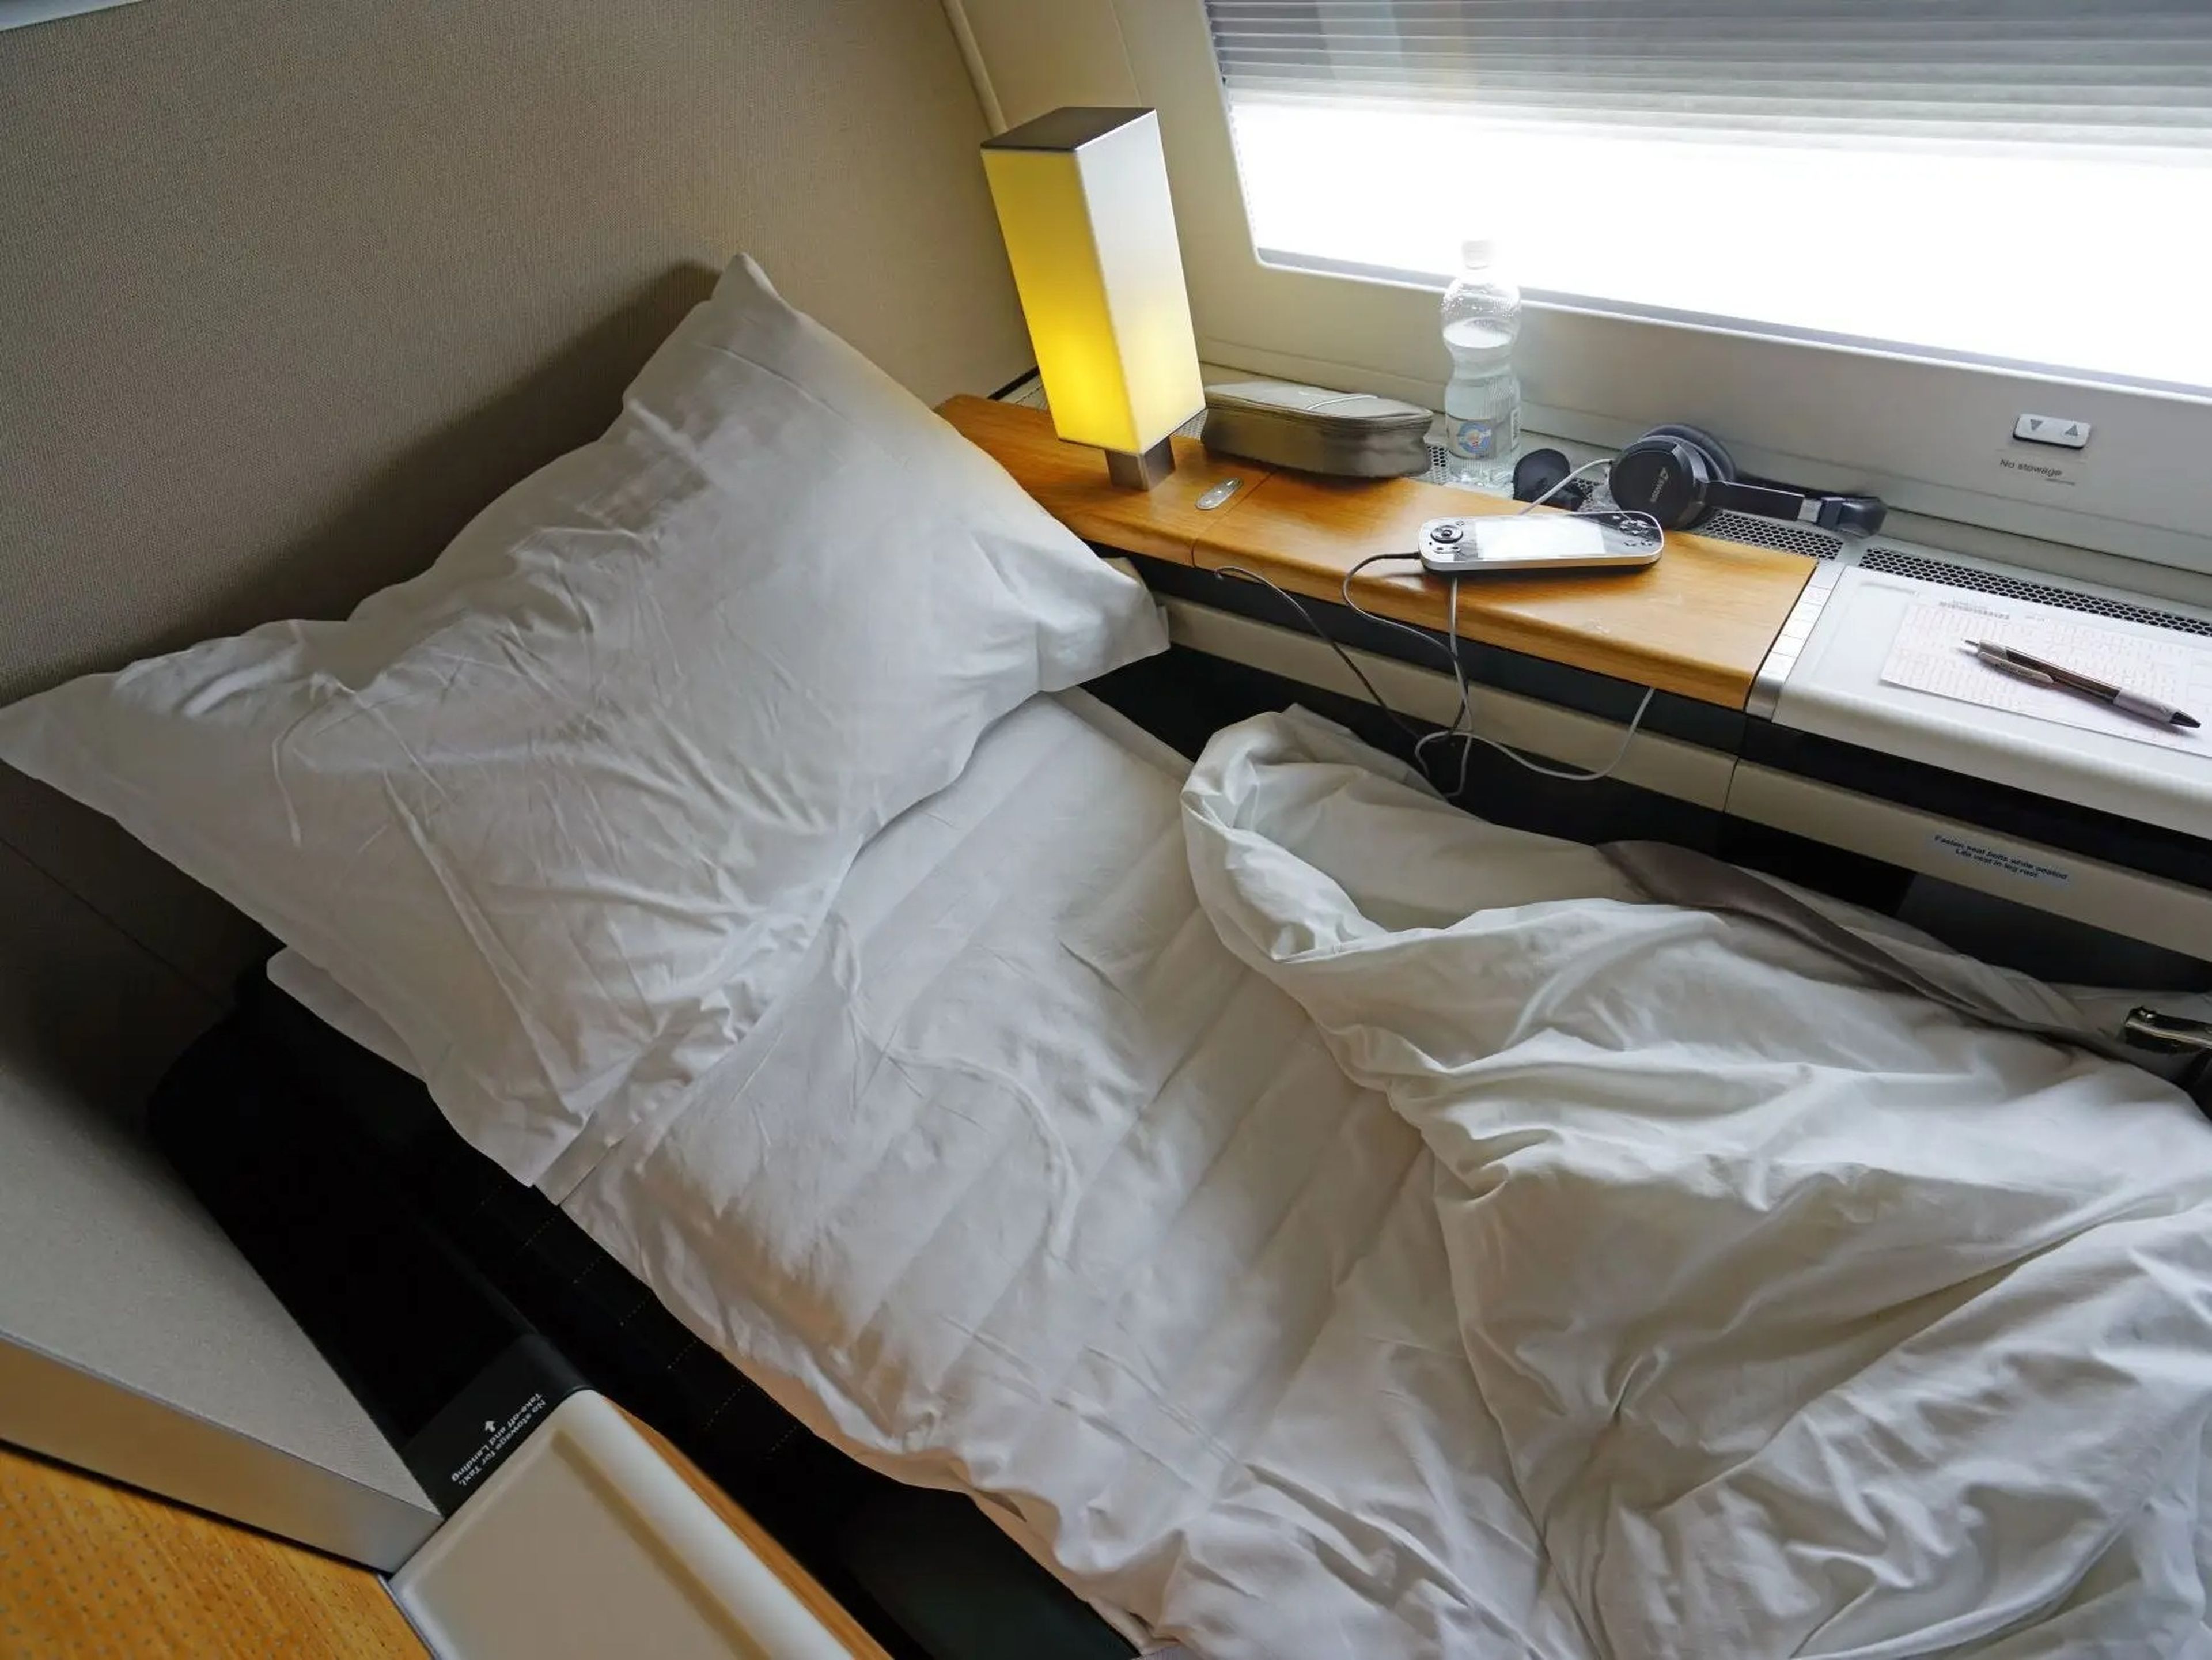 SWISS first class with lie-flat bed with bedding.